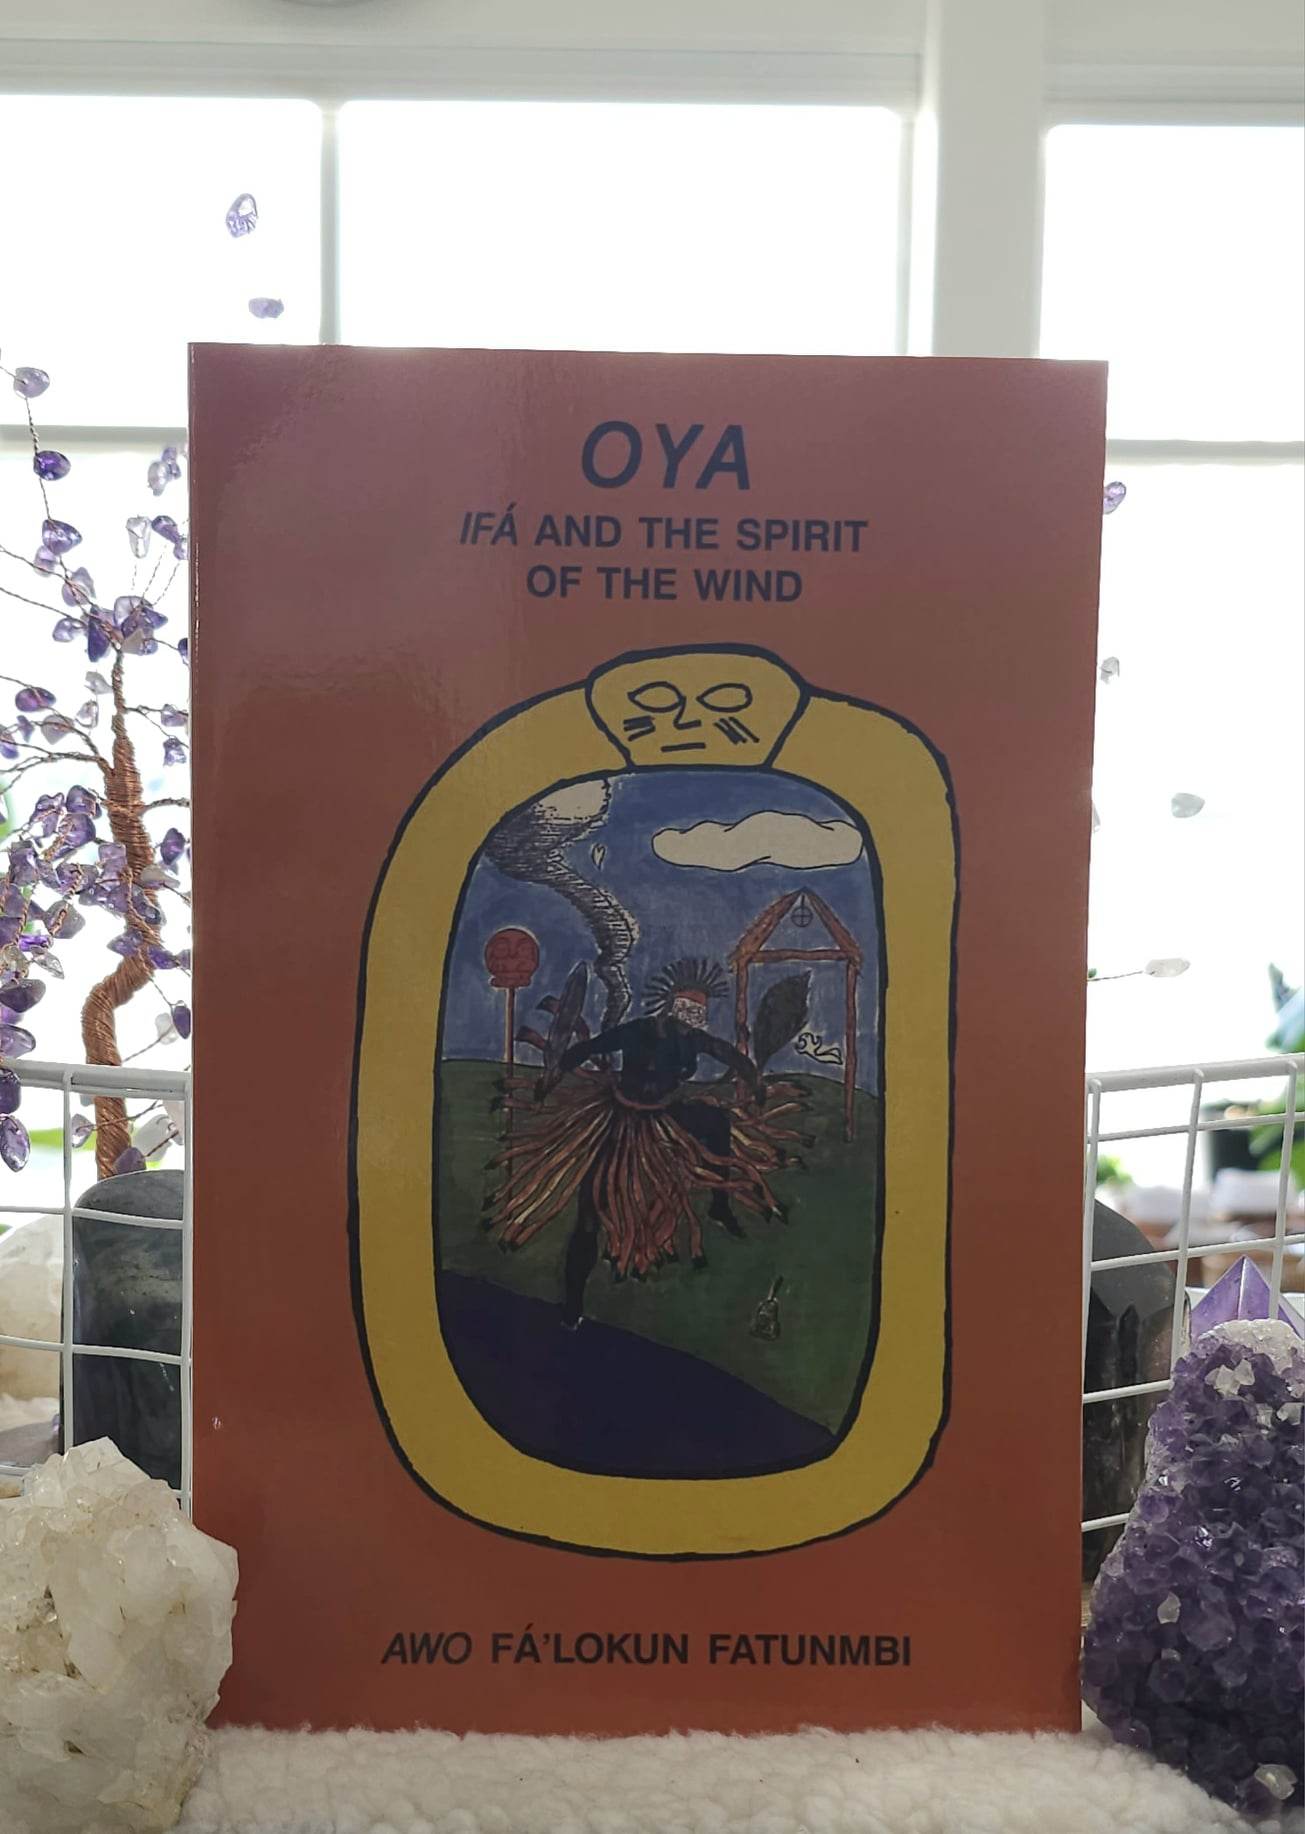 OYA: Ifa and the Spirit of the Wind